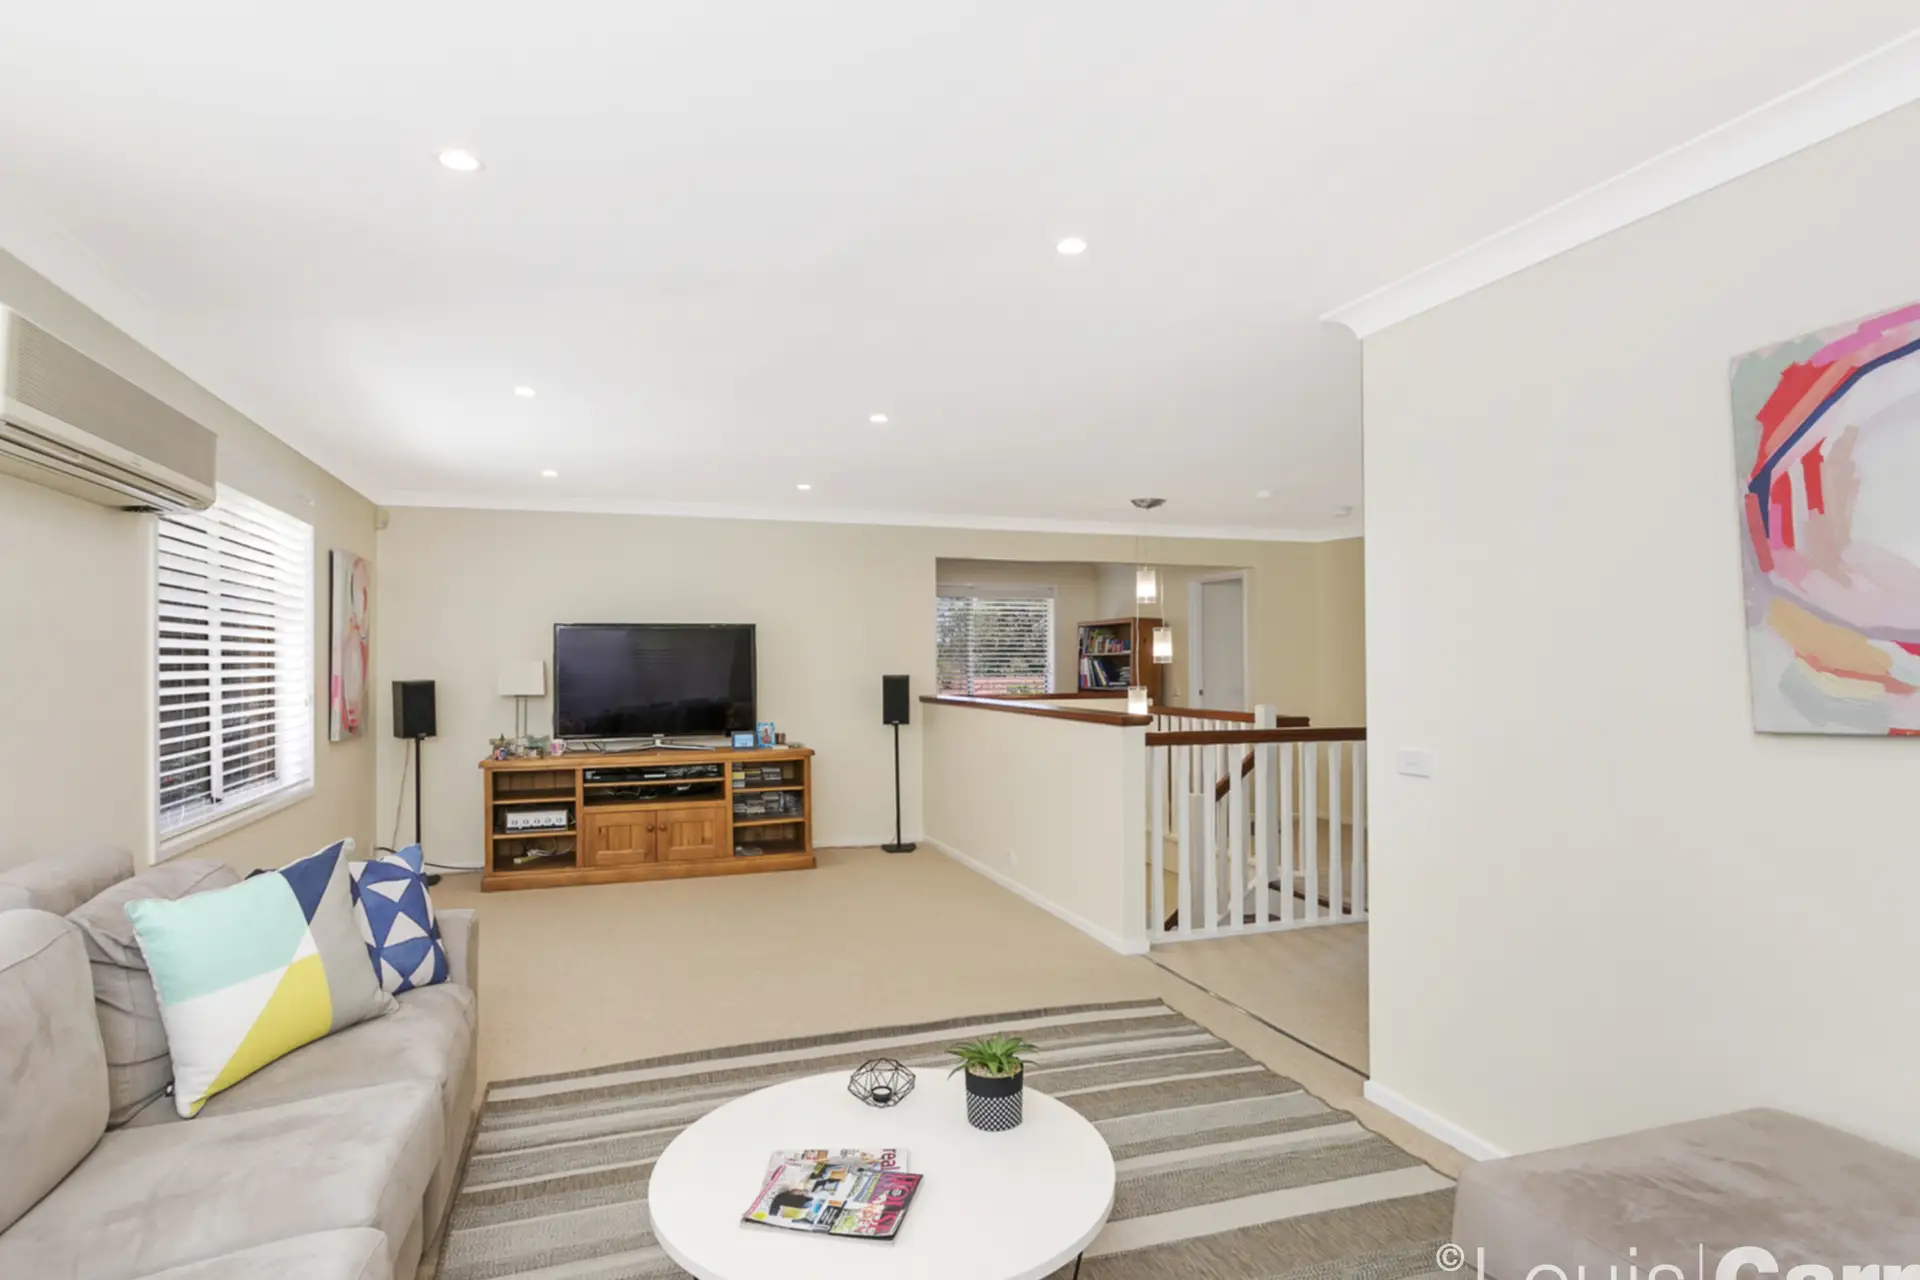 Photo #4: 3 Millstream Grove, Dural - Sold by Louis Carr Real Estate